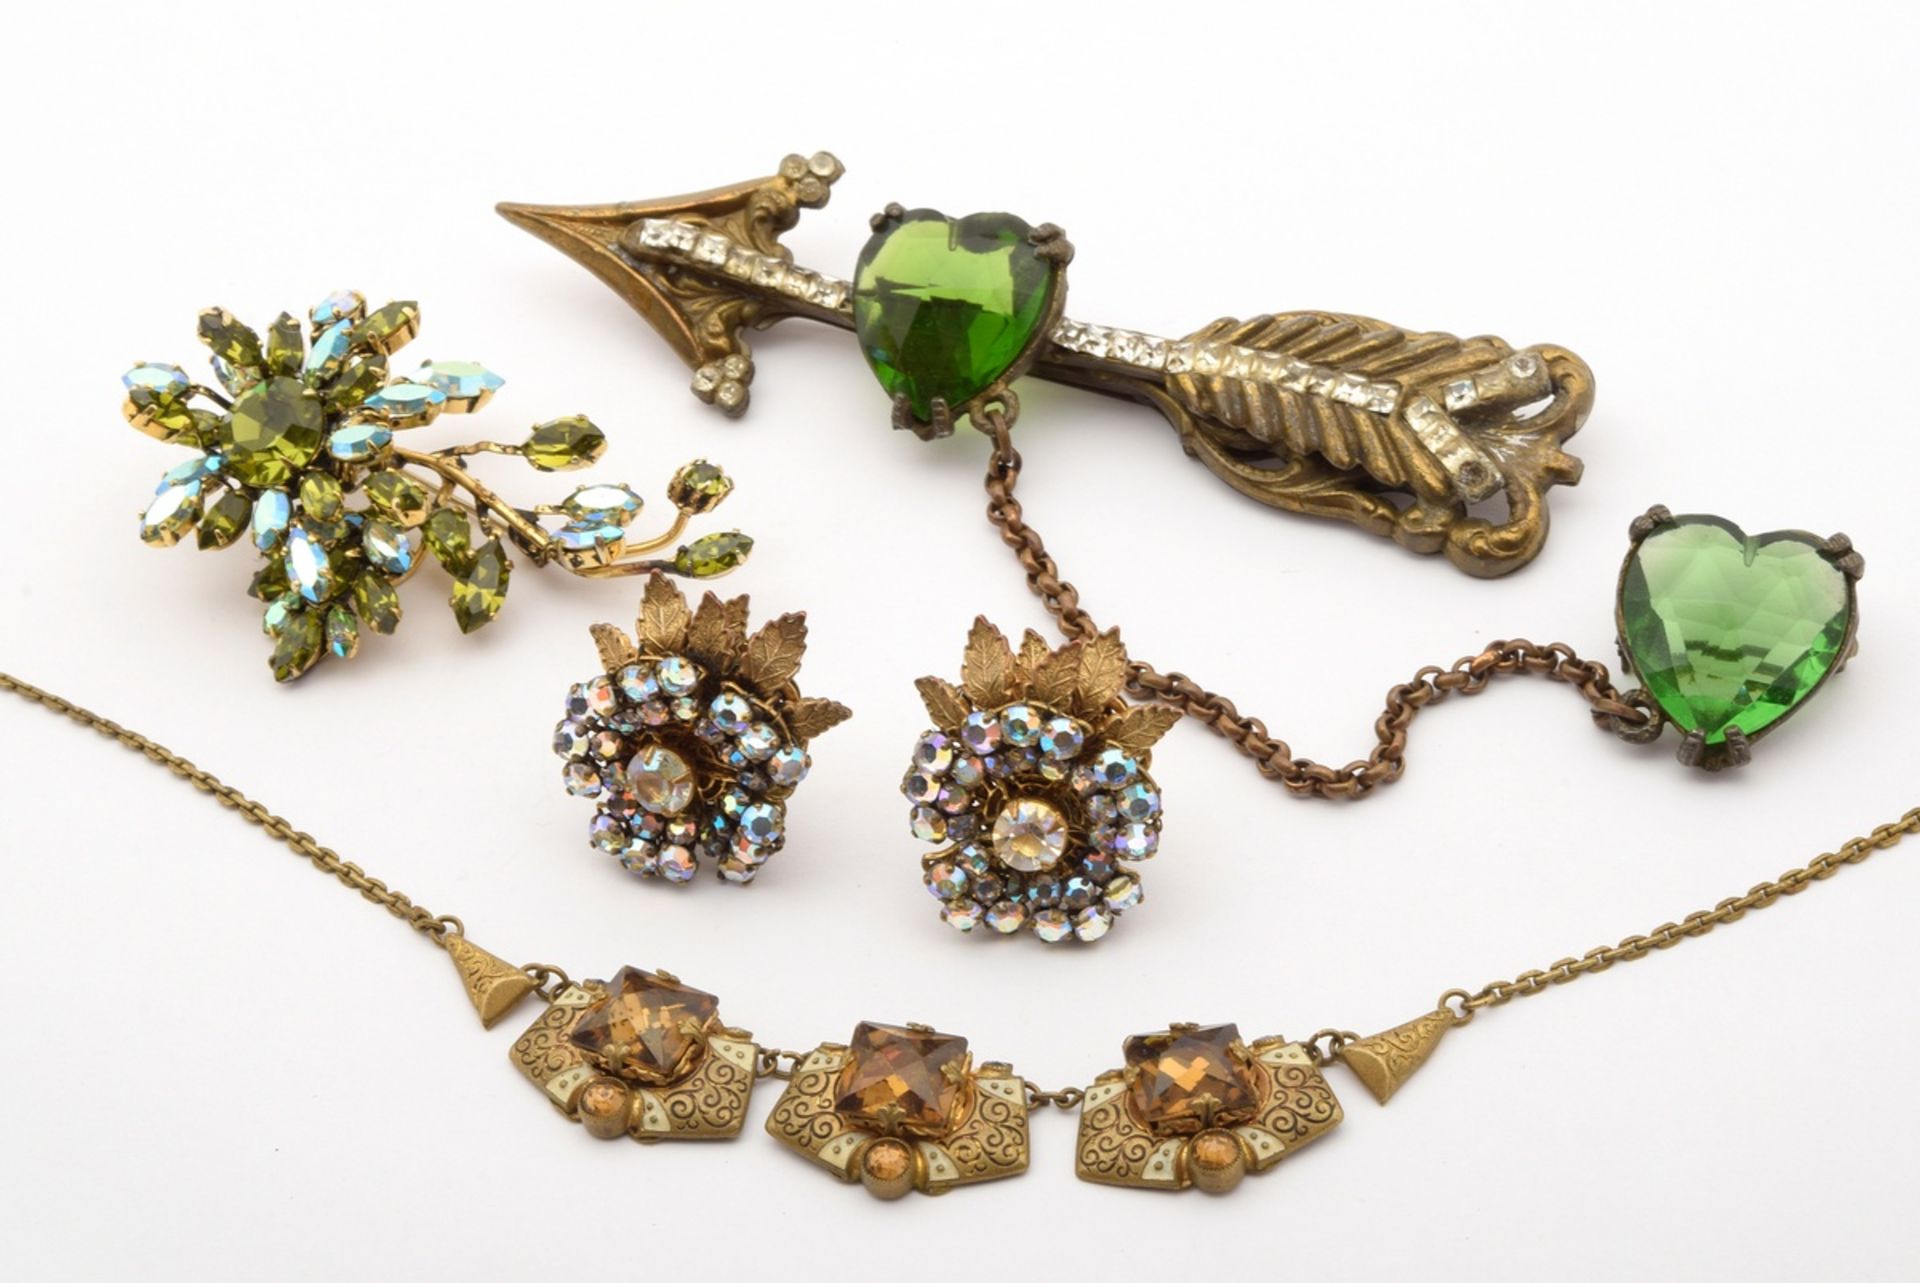 5 pieces of gold-plated costume jewellery with rhinestones and glass stones: 1x necklace, c. 1920, 